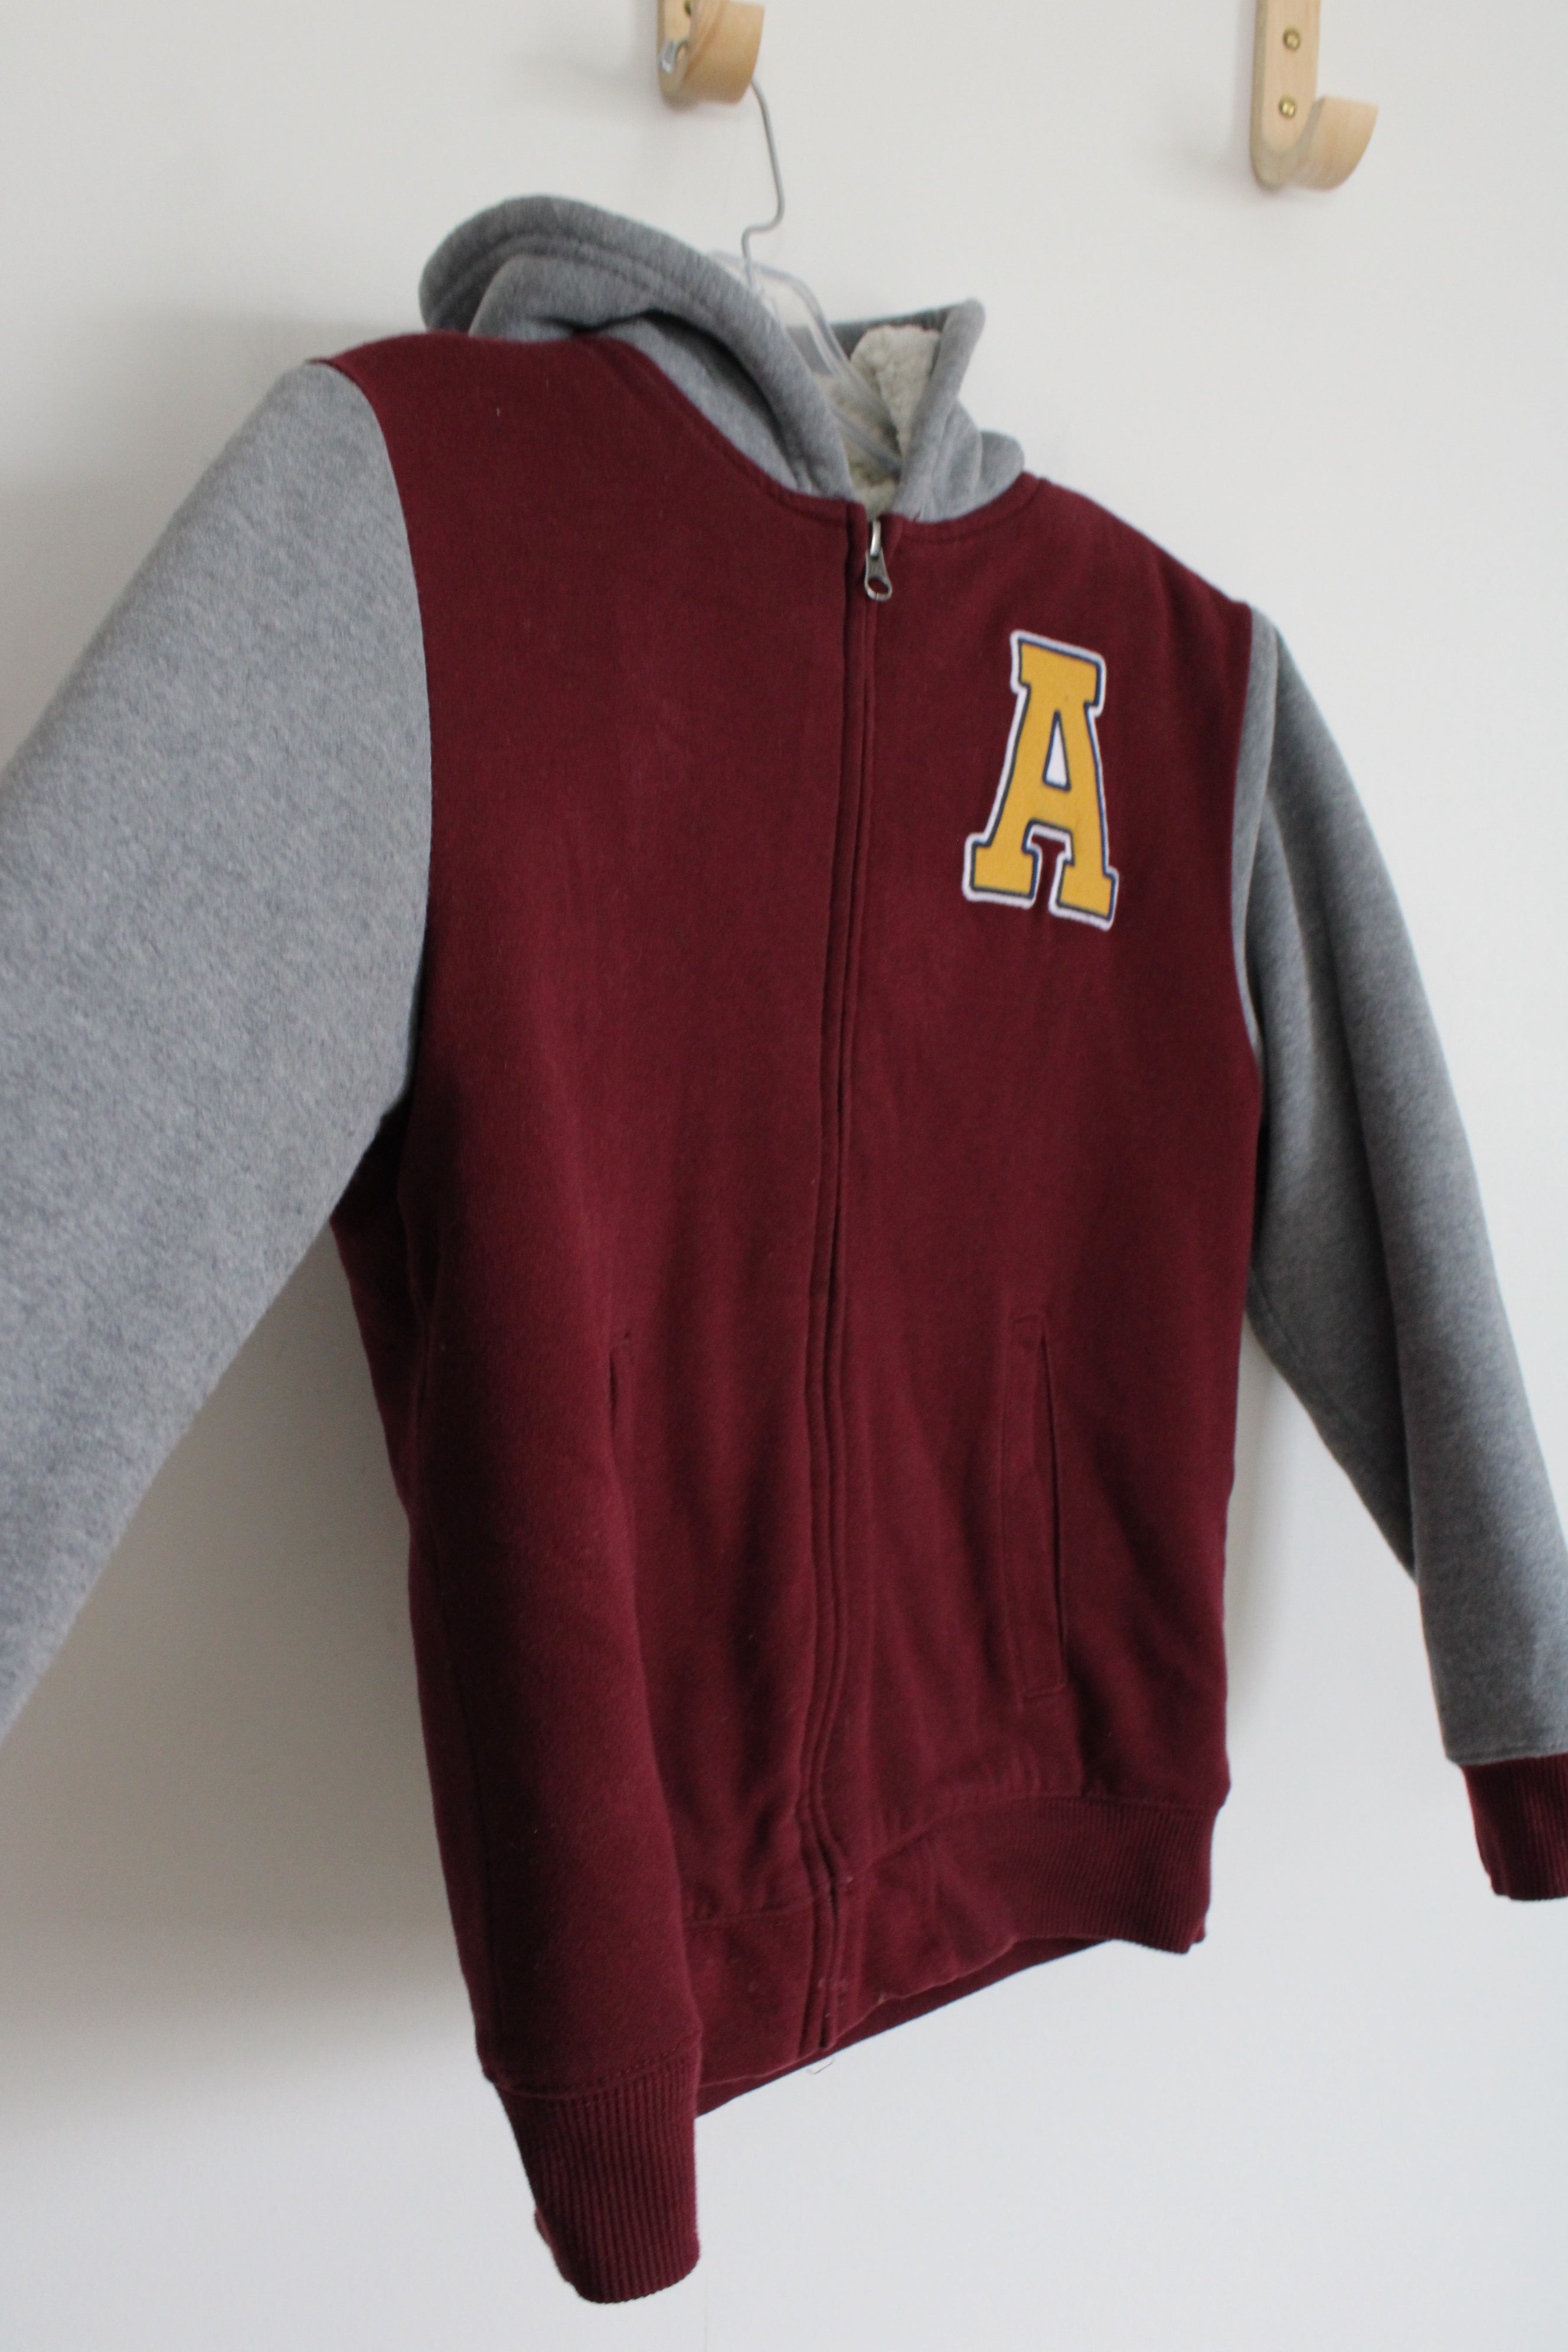 Children's Place Maroon Sherpa Lined Hoodie | Youth L (10/12)